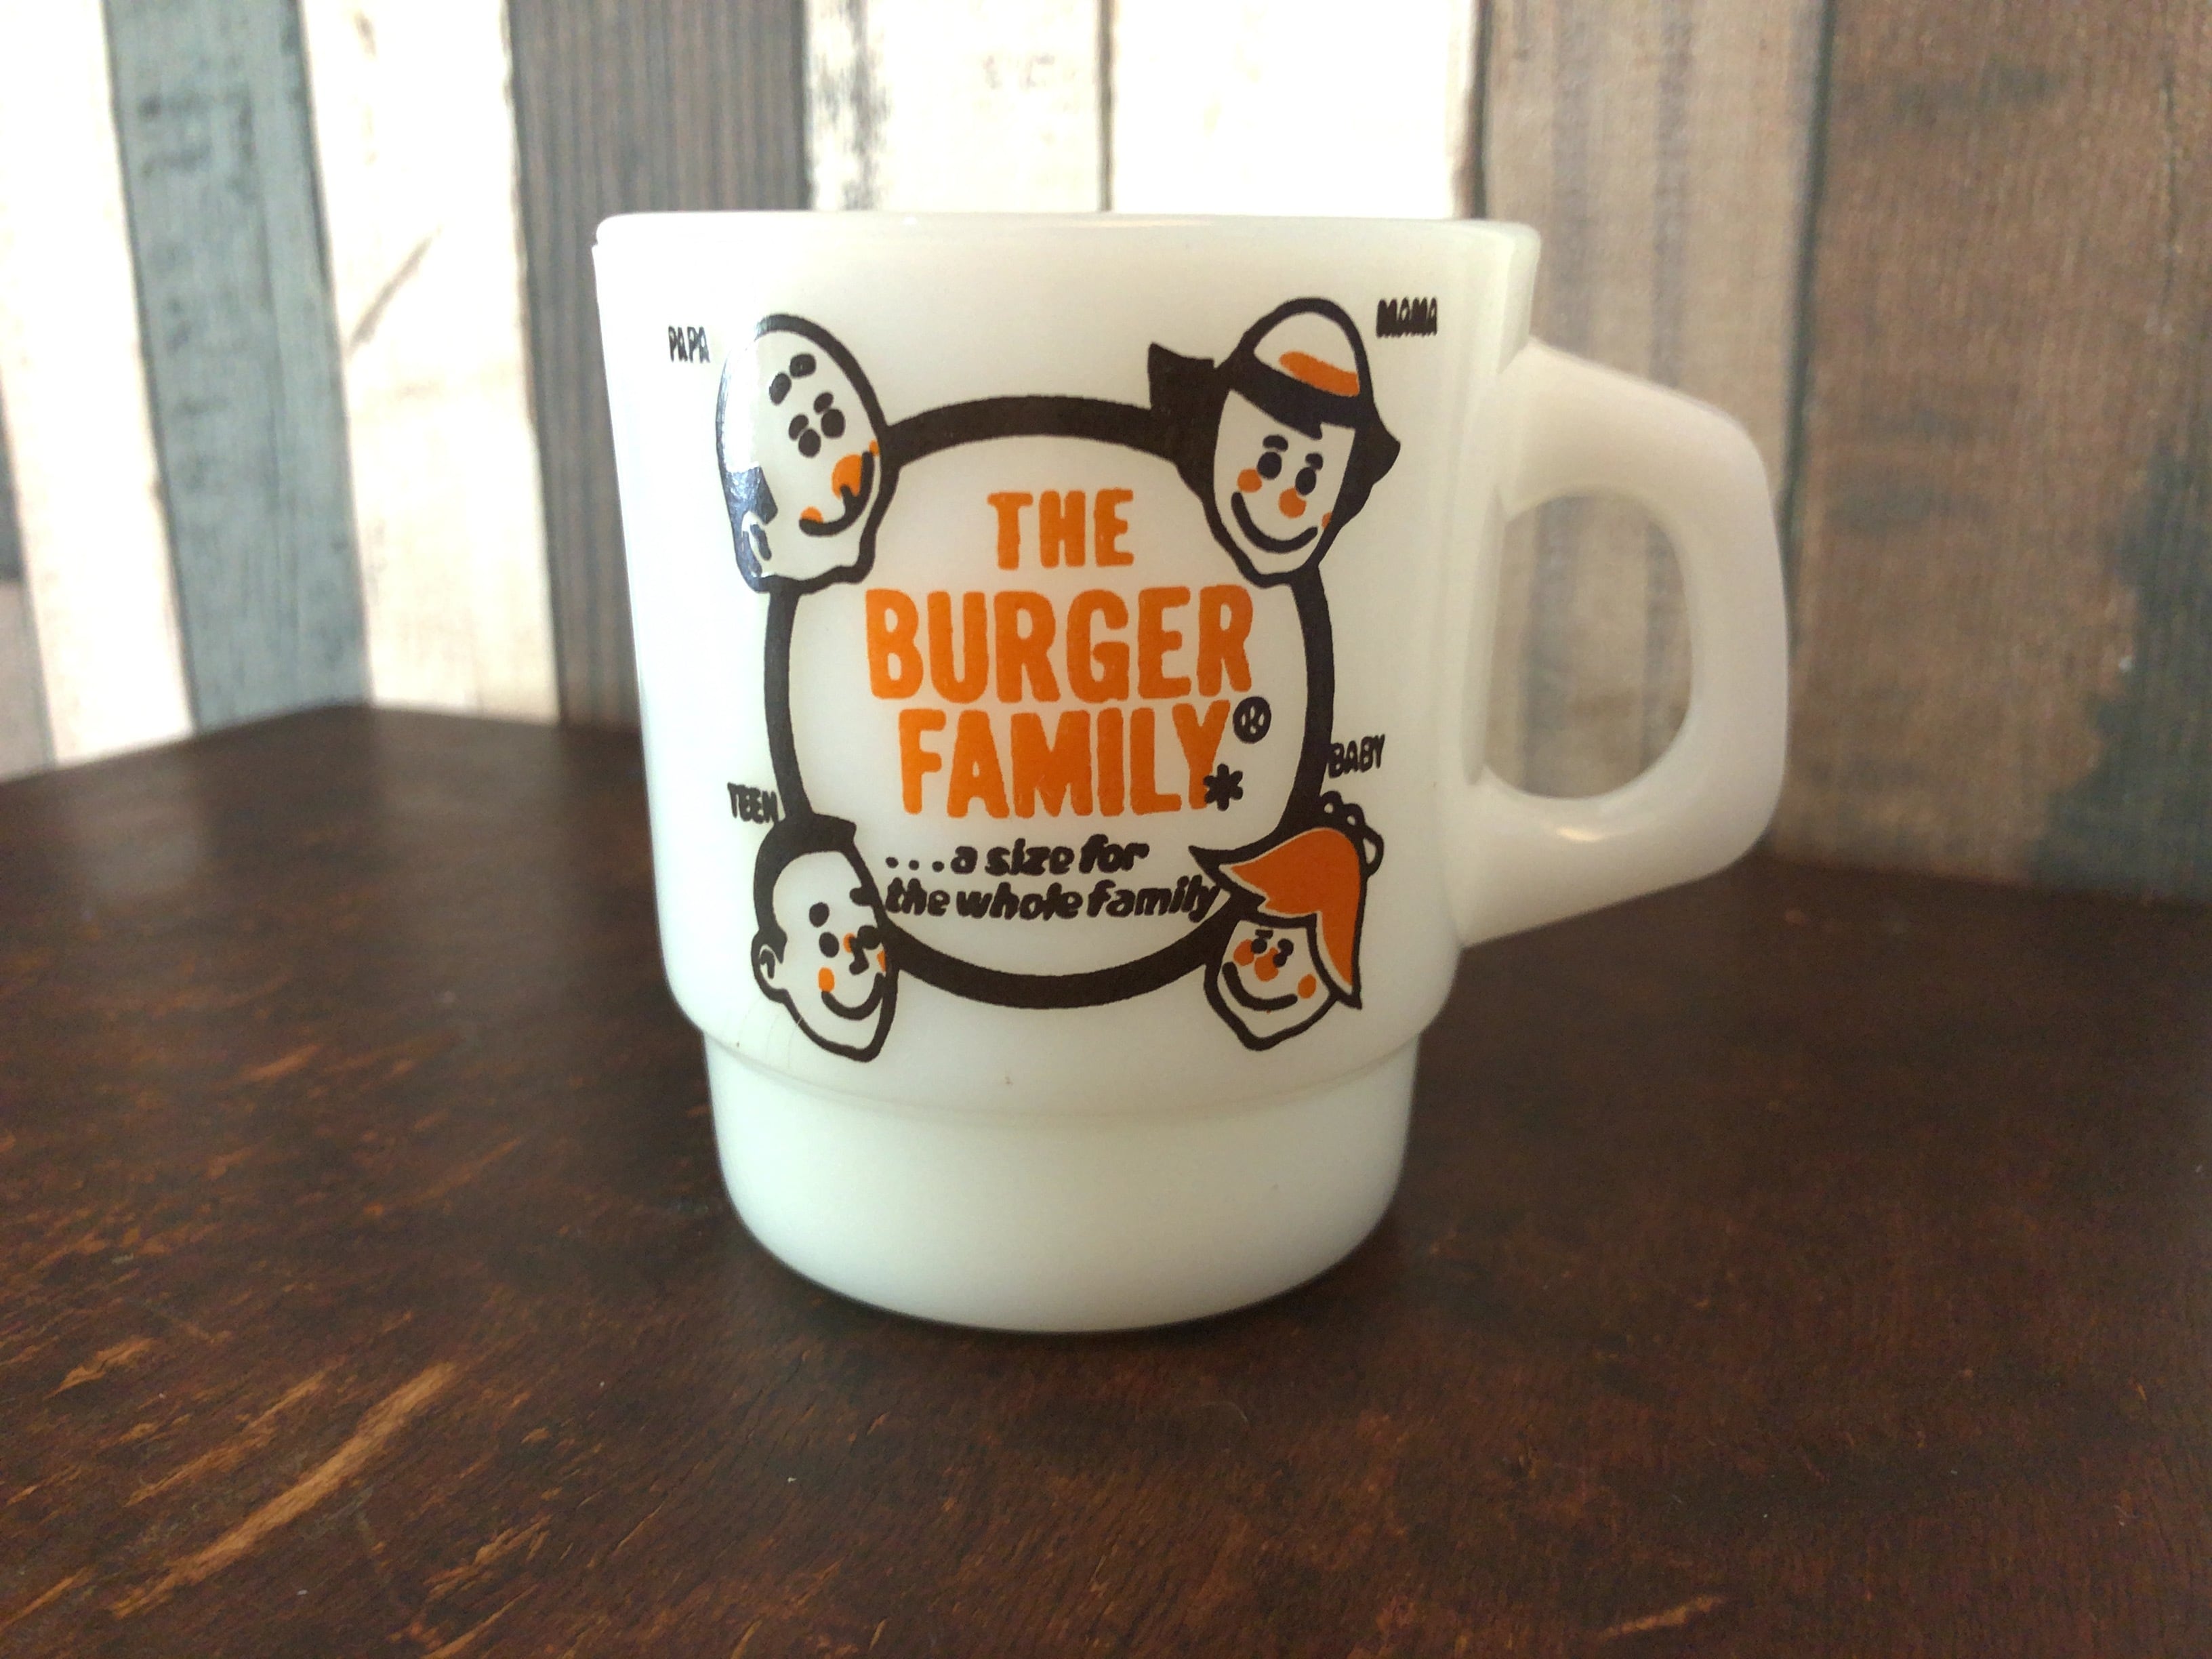 Fire-king マグカップ「A&W THE BURGER FAMILY」 | earl